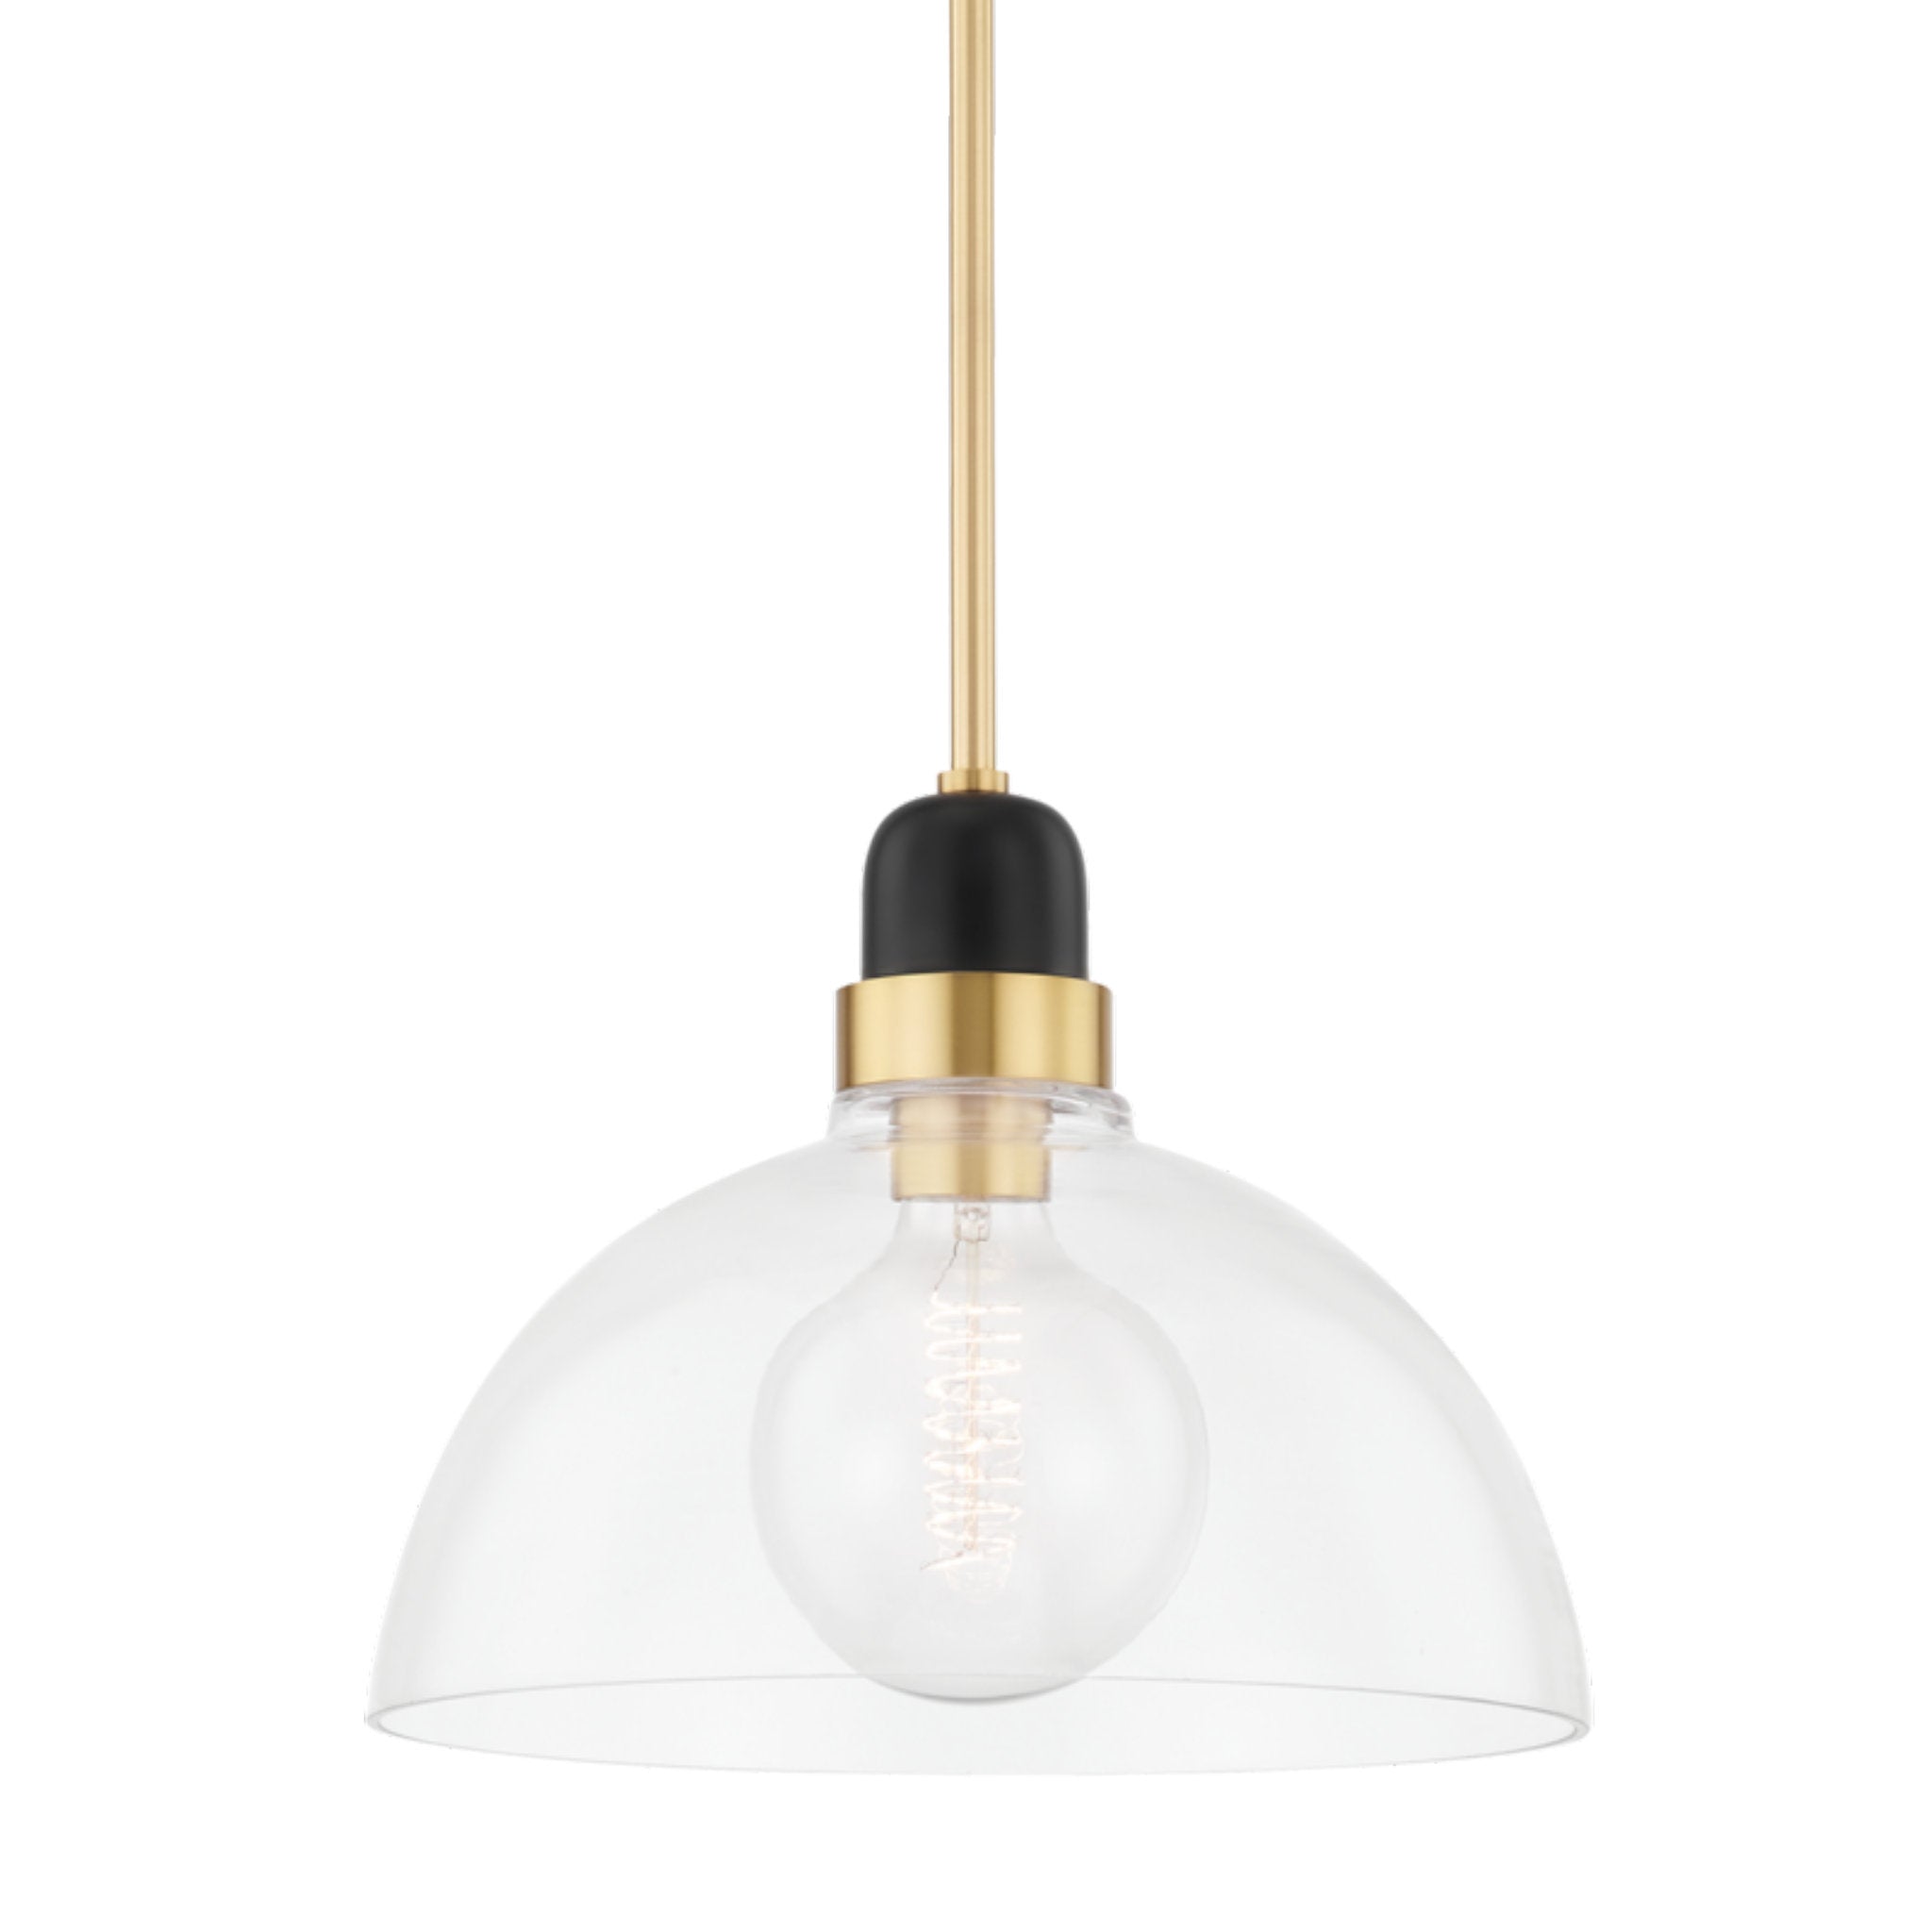 Camile 1 Light Pendant in Aged Brass